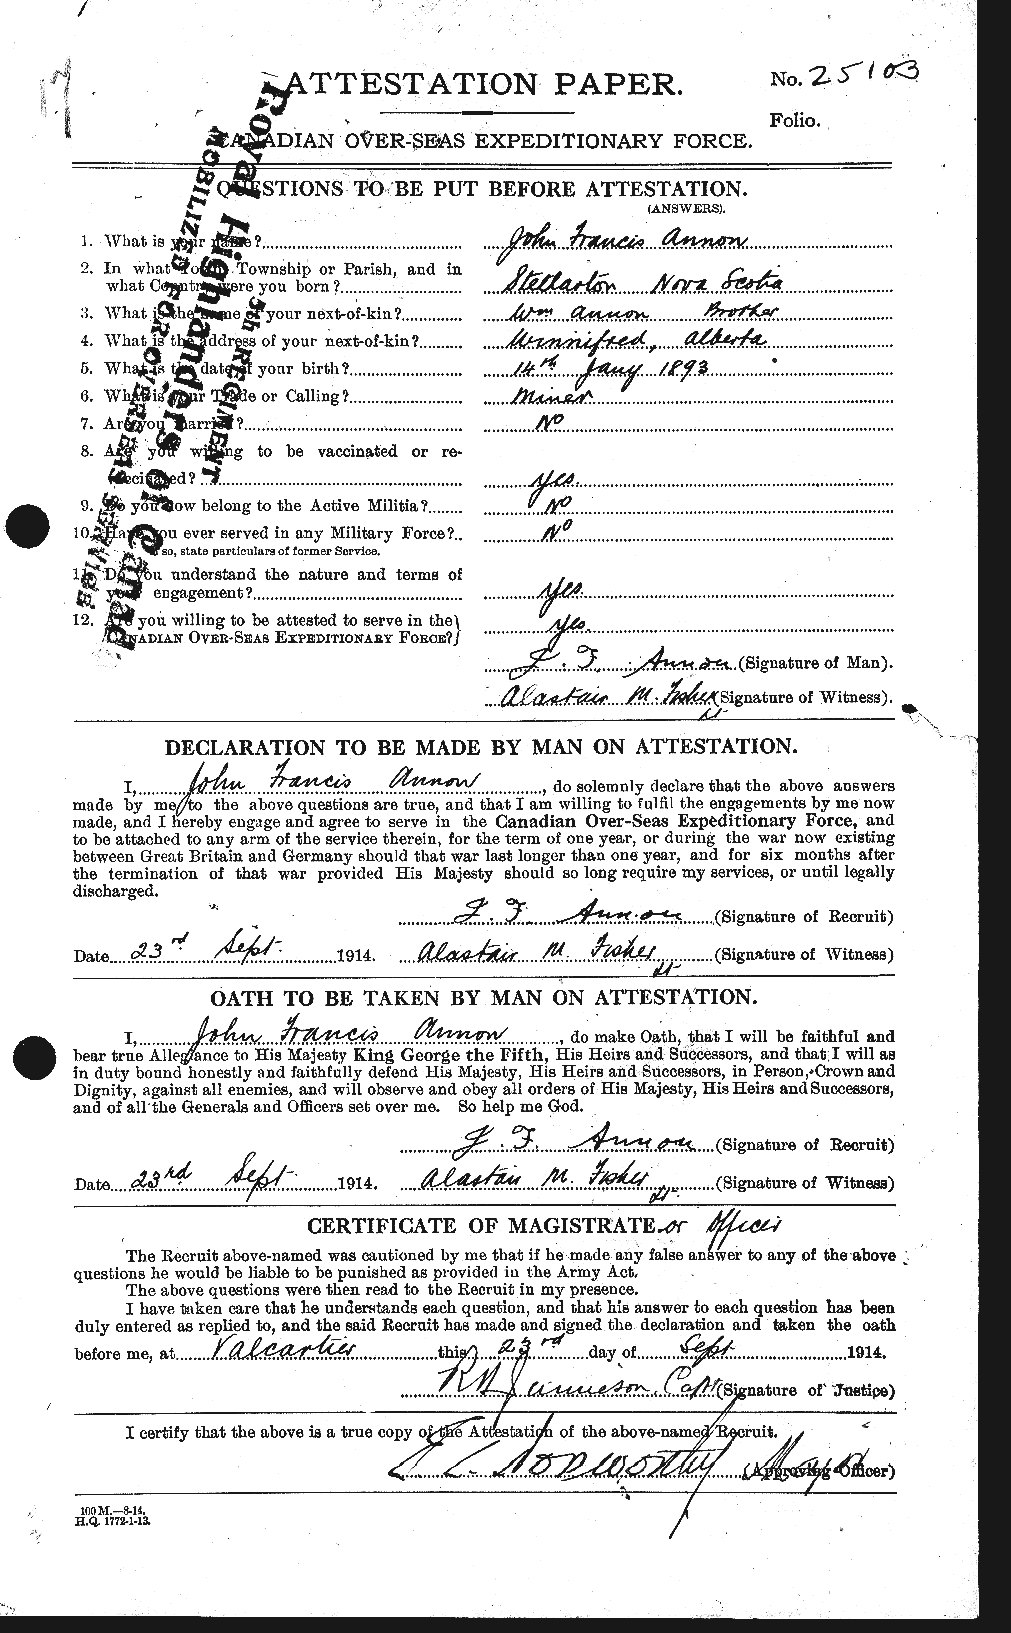 Personnel Records of the First World War - CEF 212382a